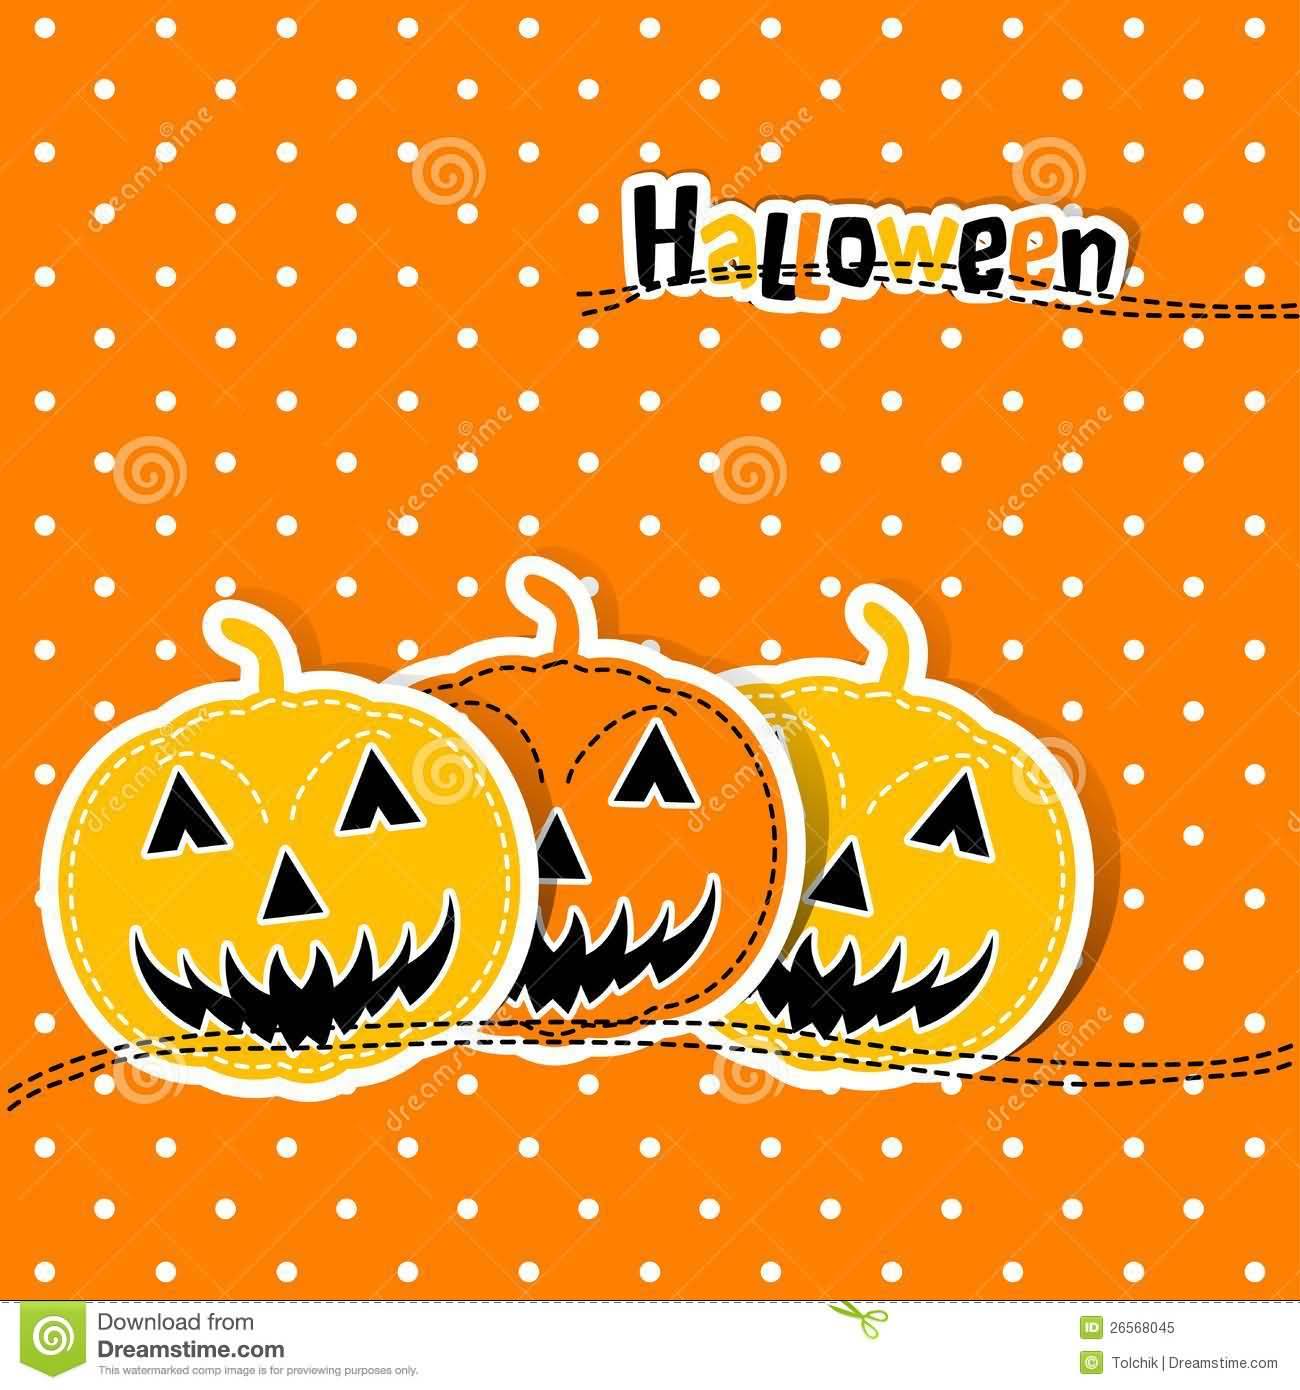 Halloween Wishes Card Pumpkins Picture